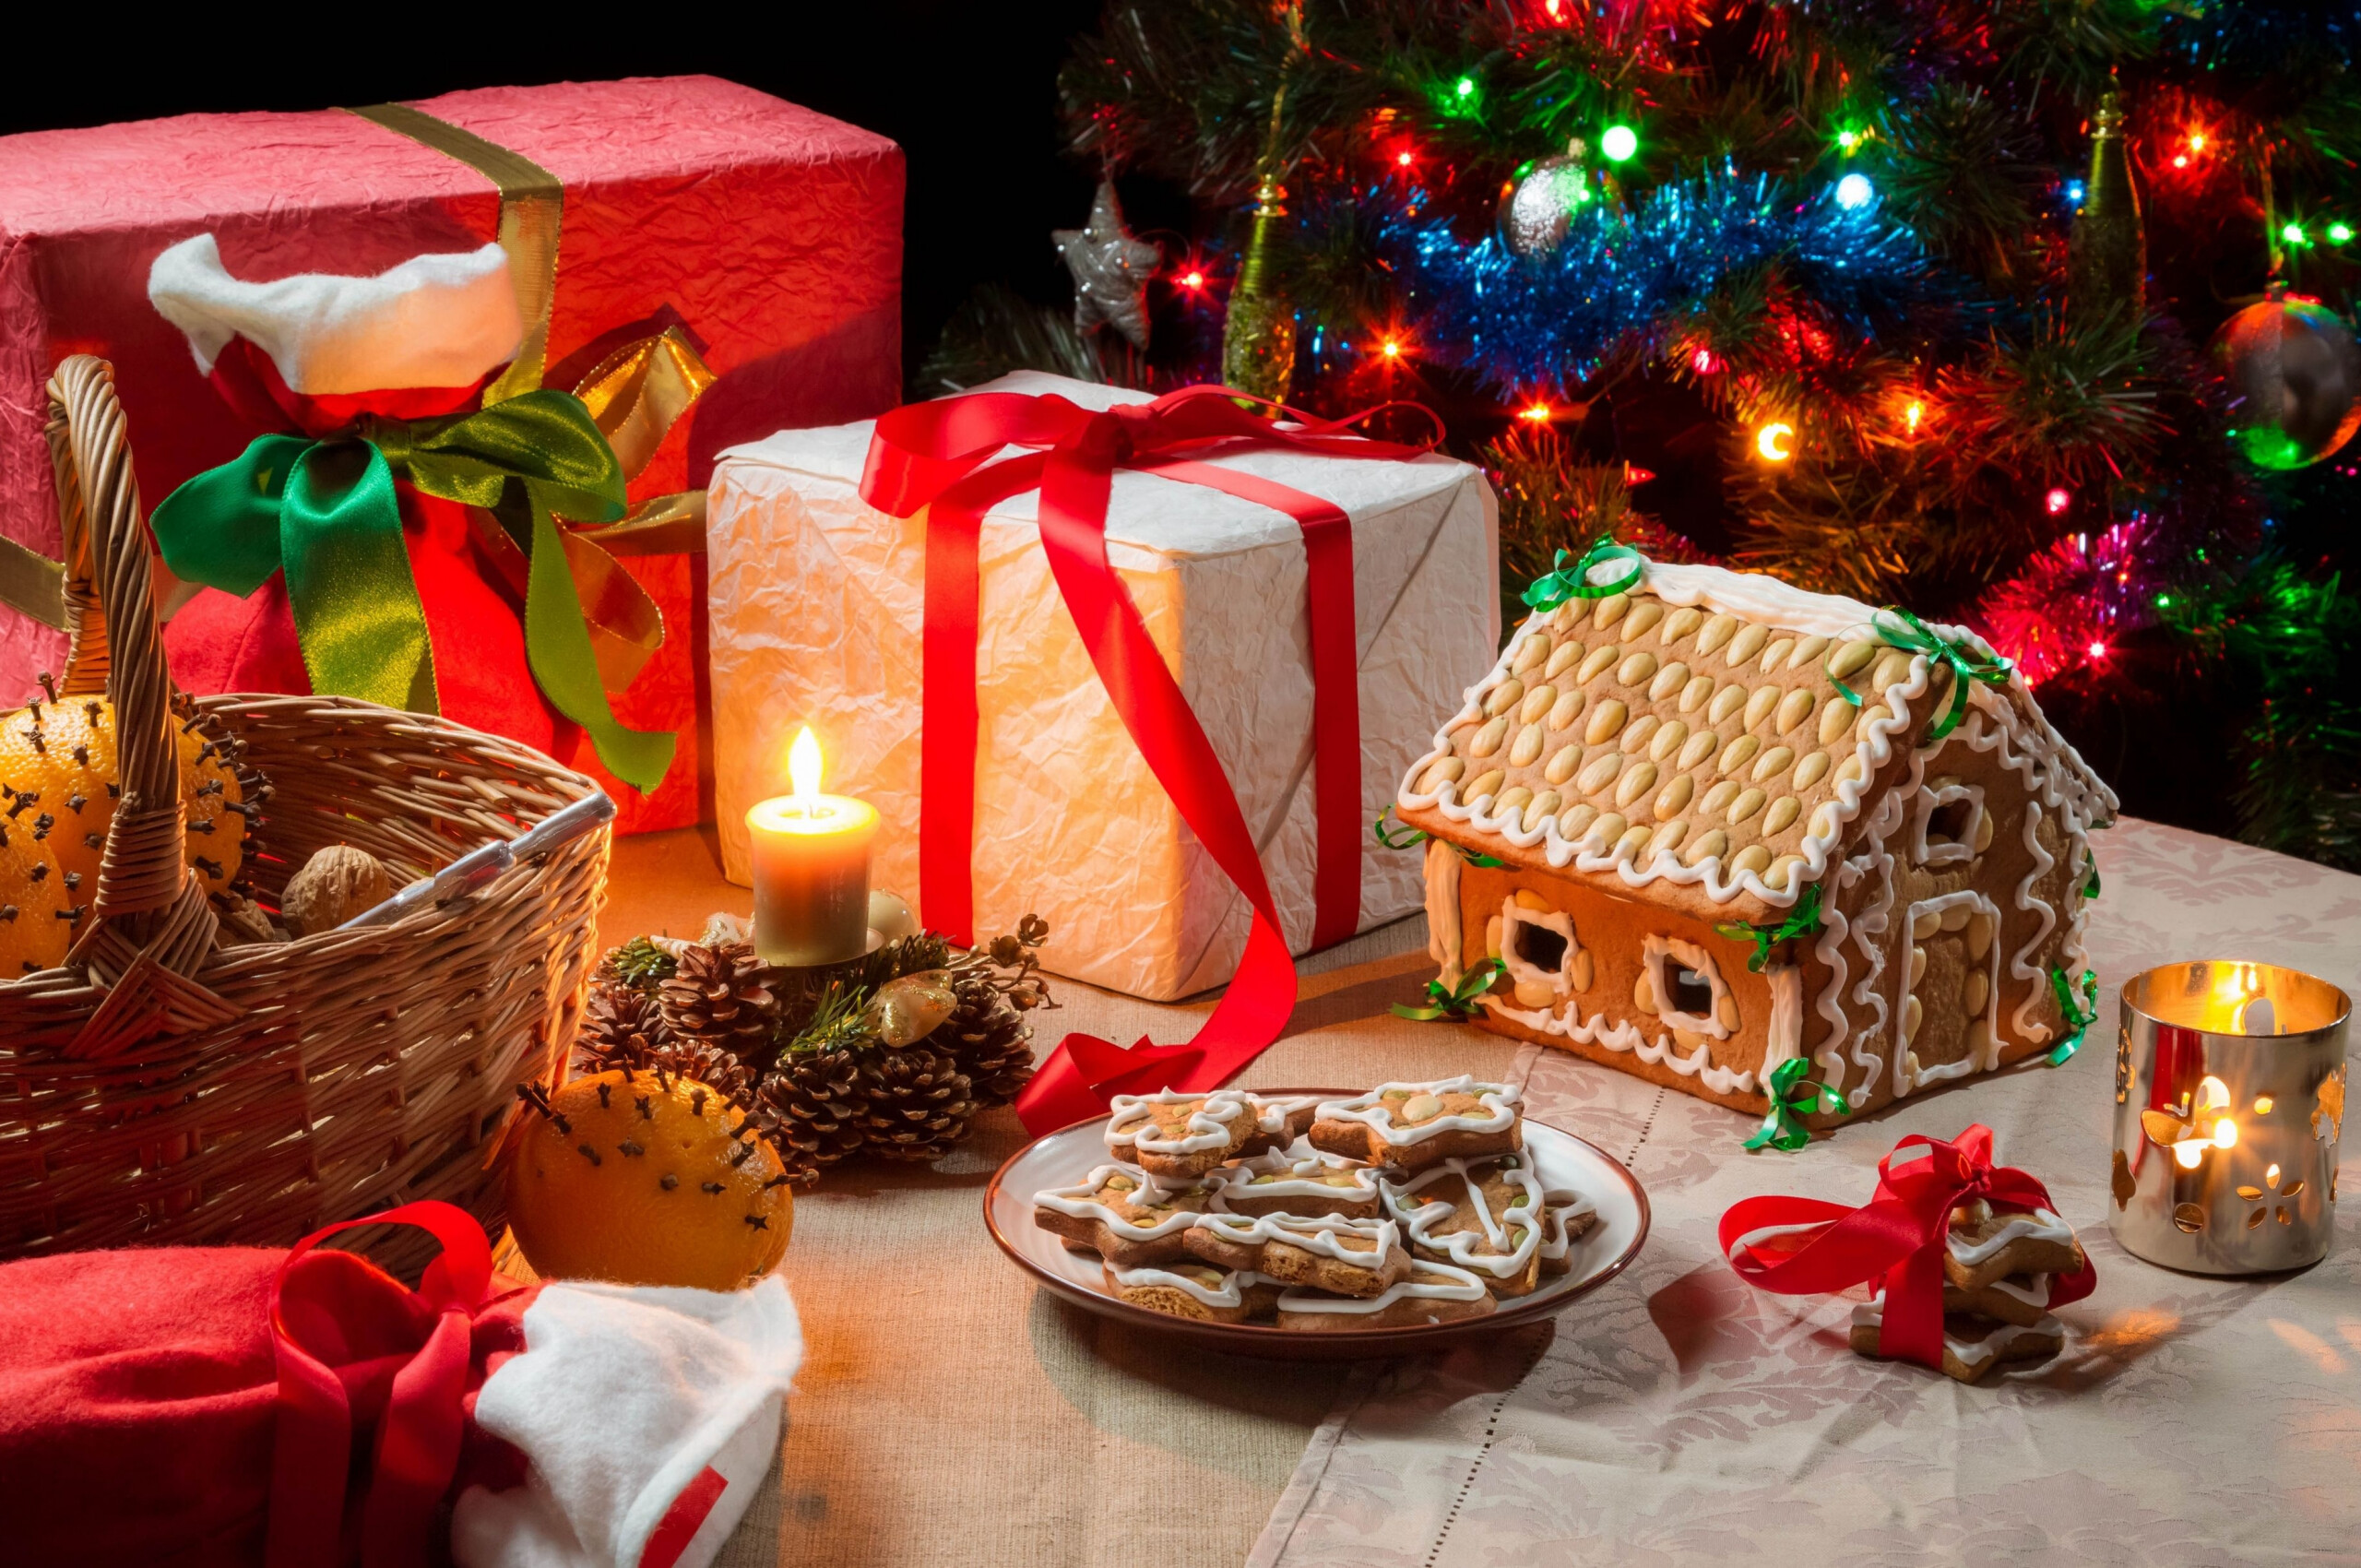 Gingerbread House: Holiday spirit, The tradition of decorative gingerbread, Tableware, Christmas ornament, Gourmet cookies. 2560x1700 HD Background.